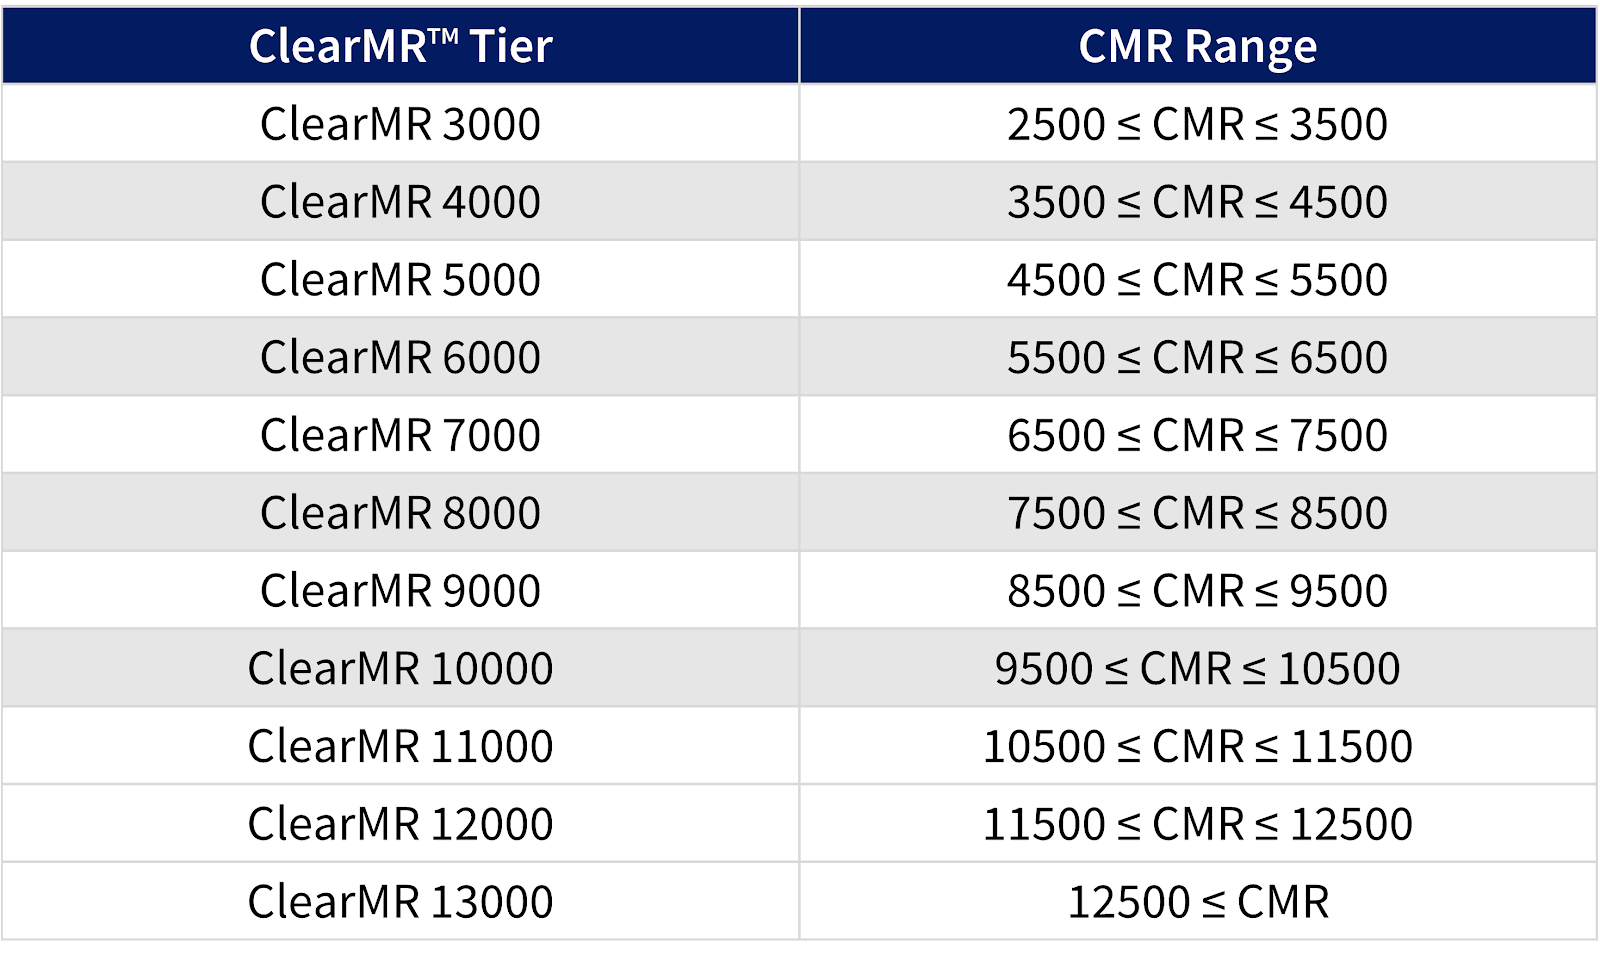 VESA ClearMRTM tiers from ClearMR 3000 to ClearMR 13000, arranged according to CMR Range